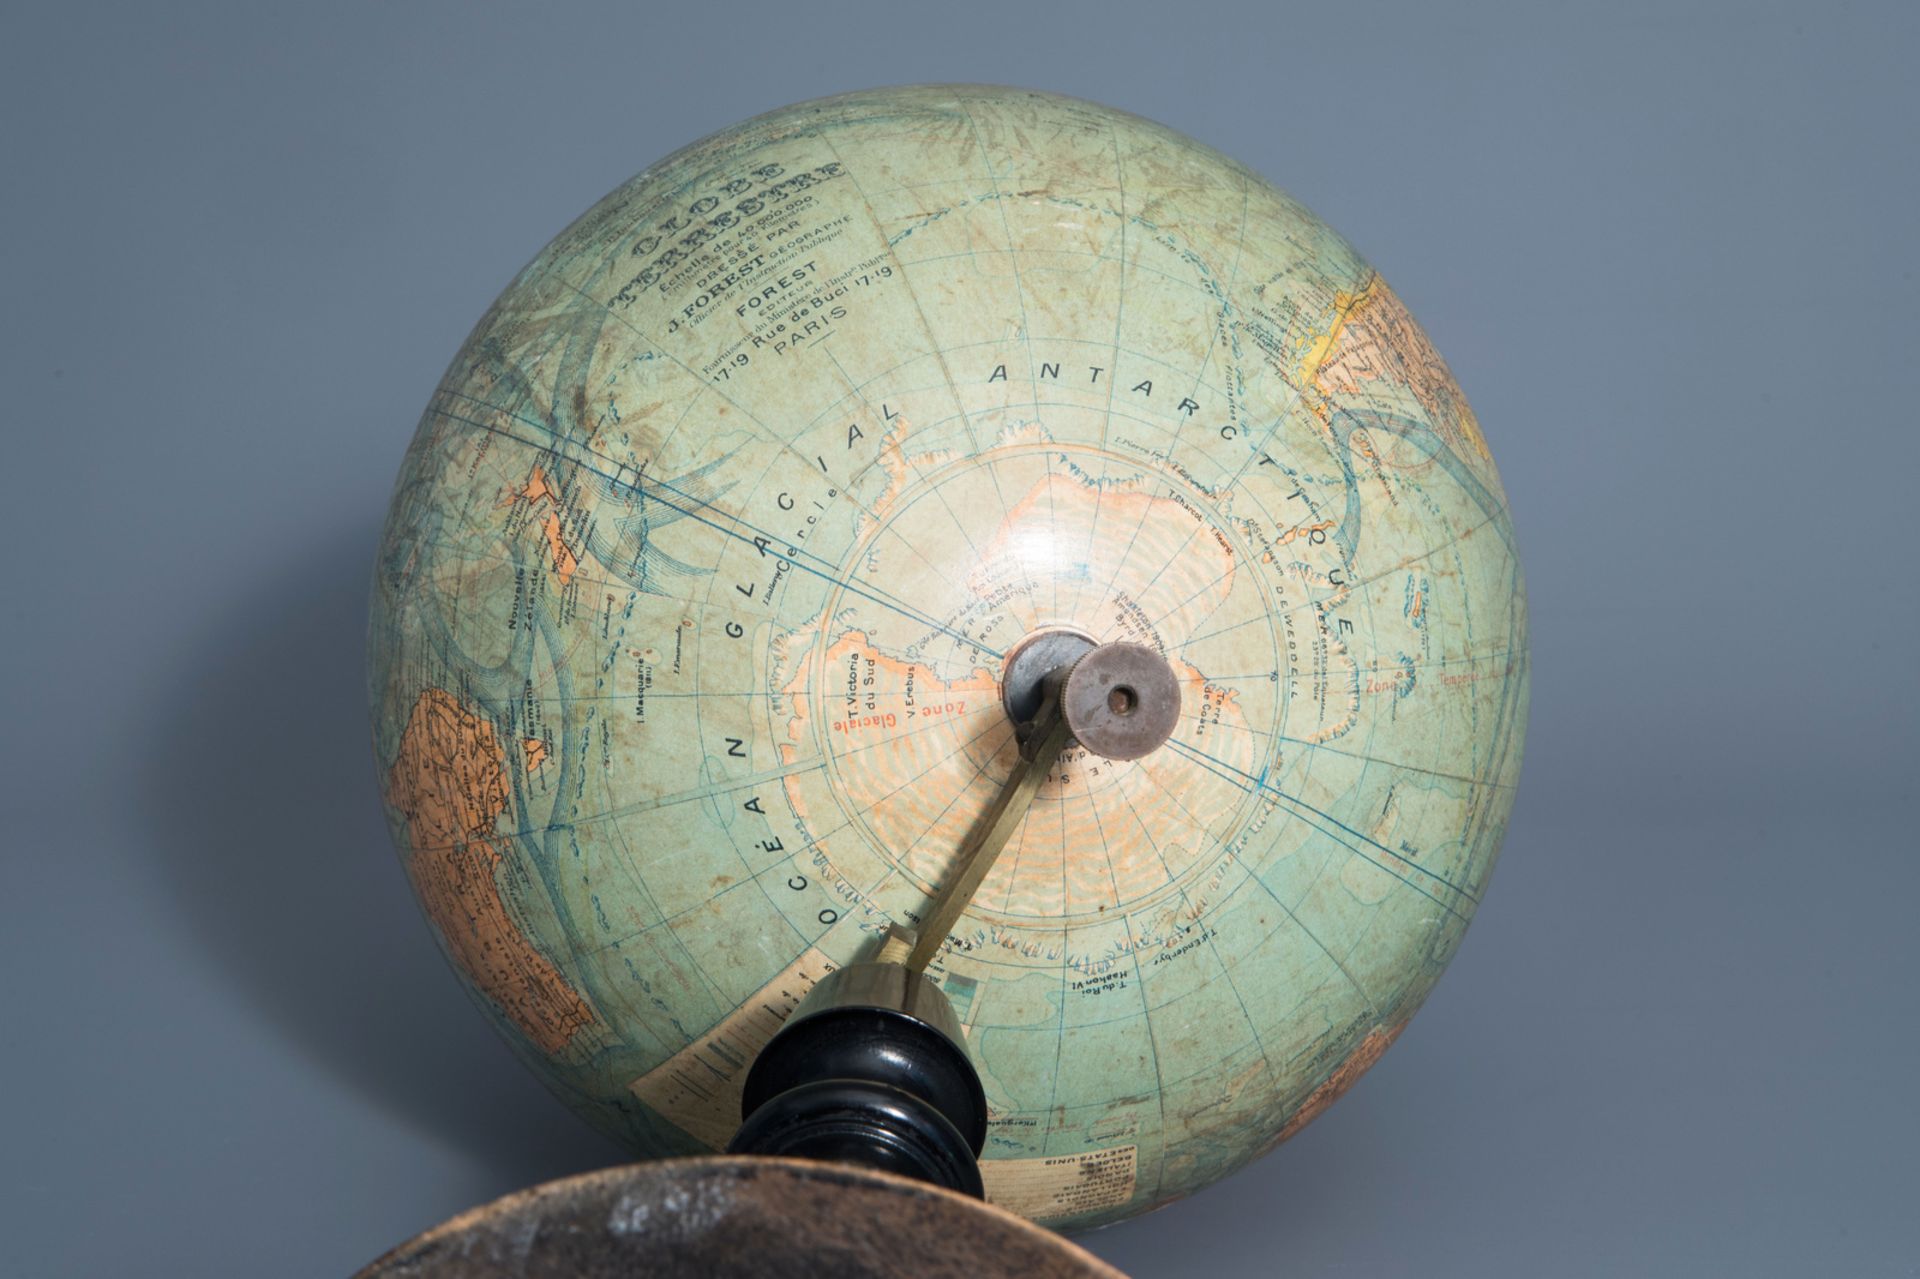 A Joseph Forest globe on an ebonized wooden base, France, about 1900 - Image 7 of 13